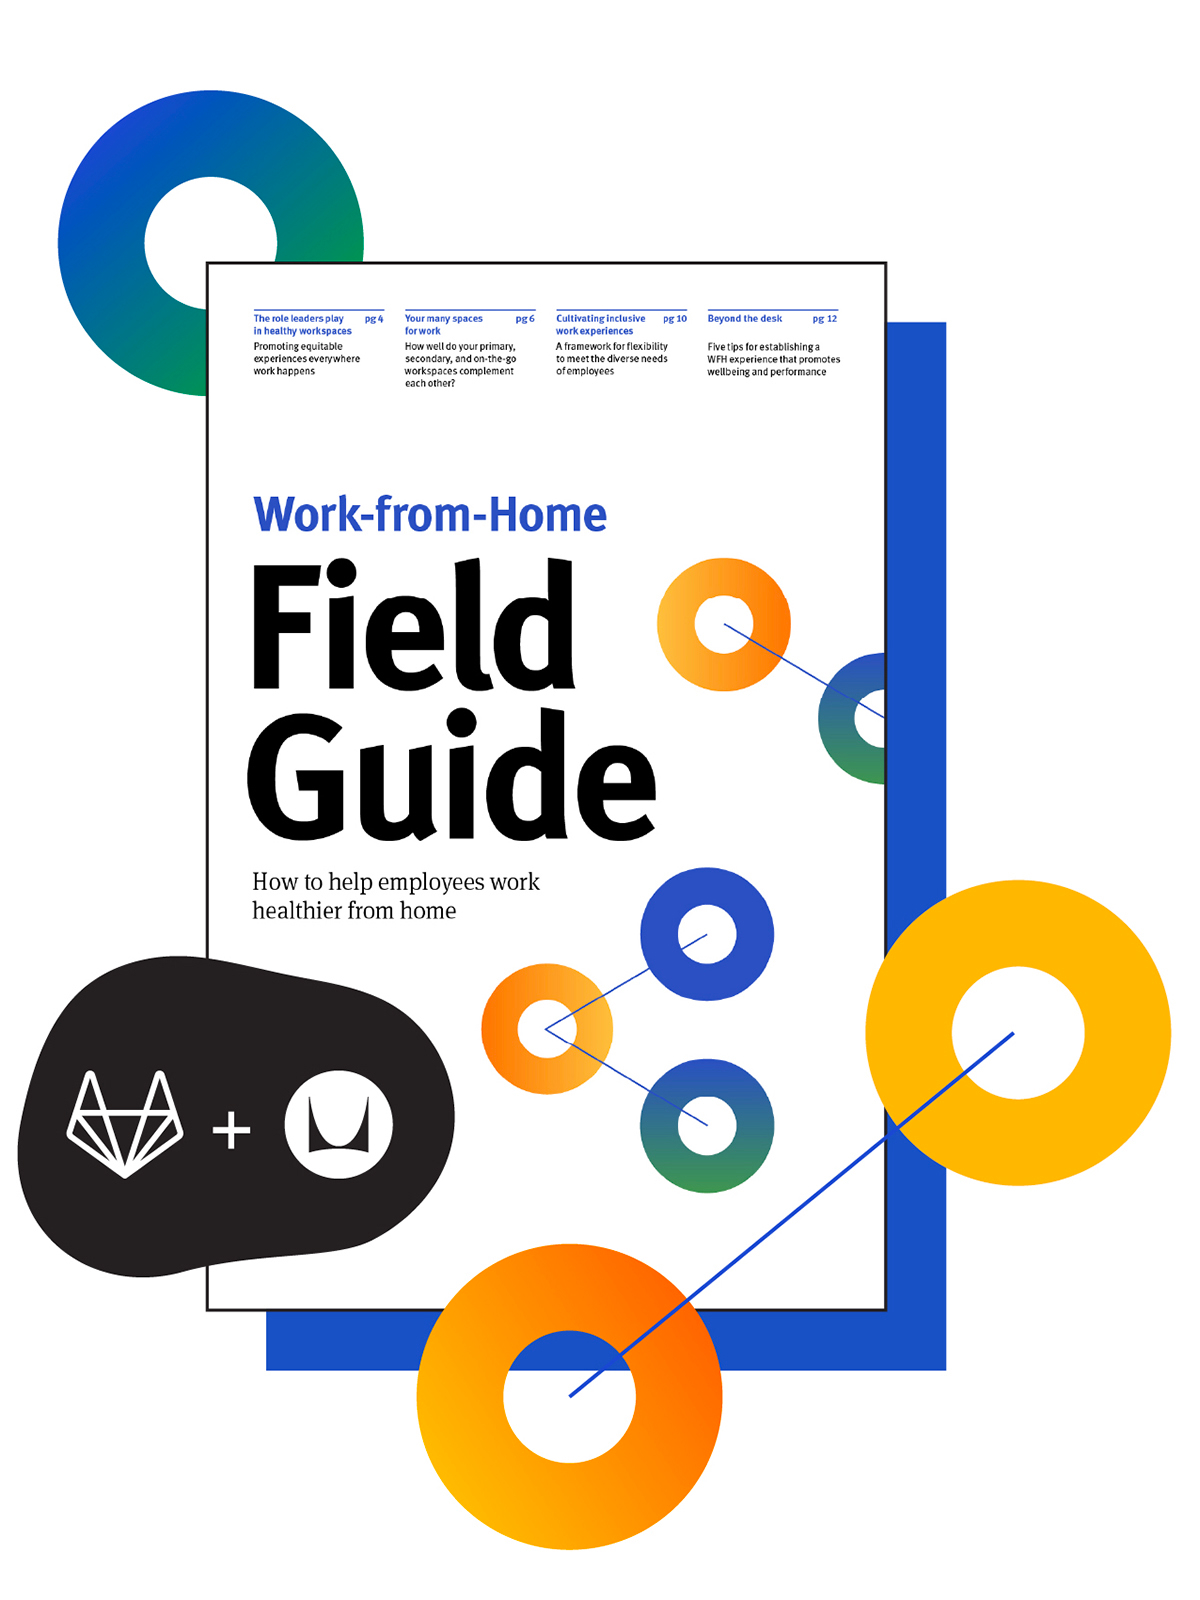 The front cover of the Work-from-Home Field Guide, a collaboration between the remote work experts at GitLab and Herman Miller.